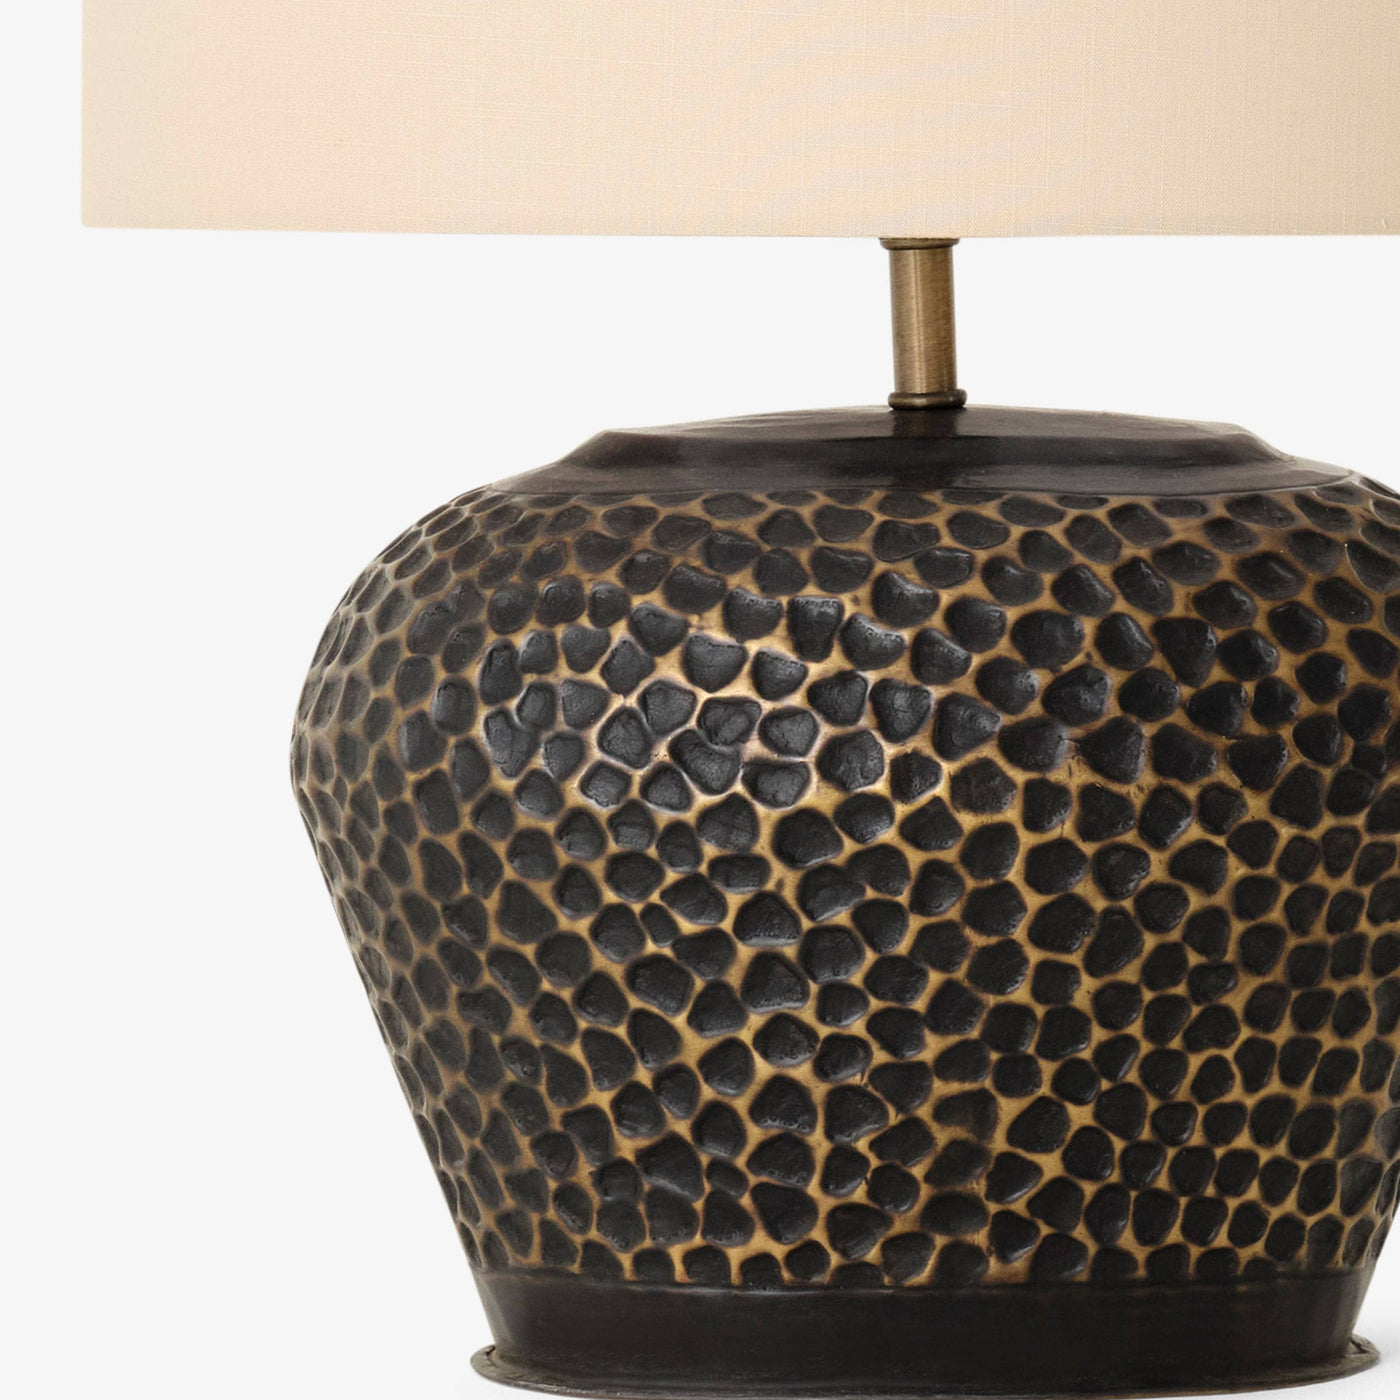 Tiberius Table Lamp, Bronze Table & Bedside Lamps sazy.com